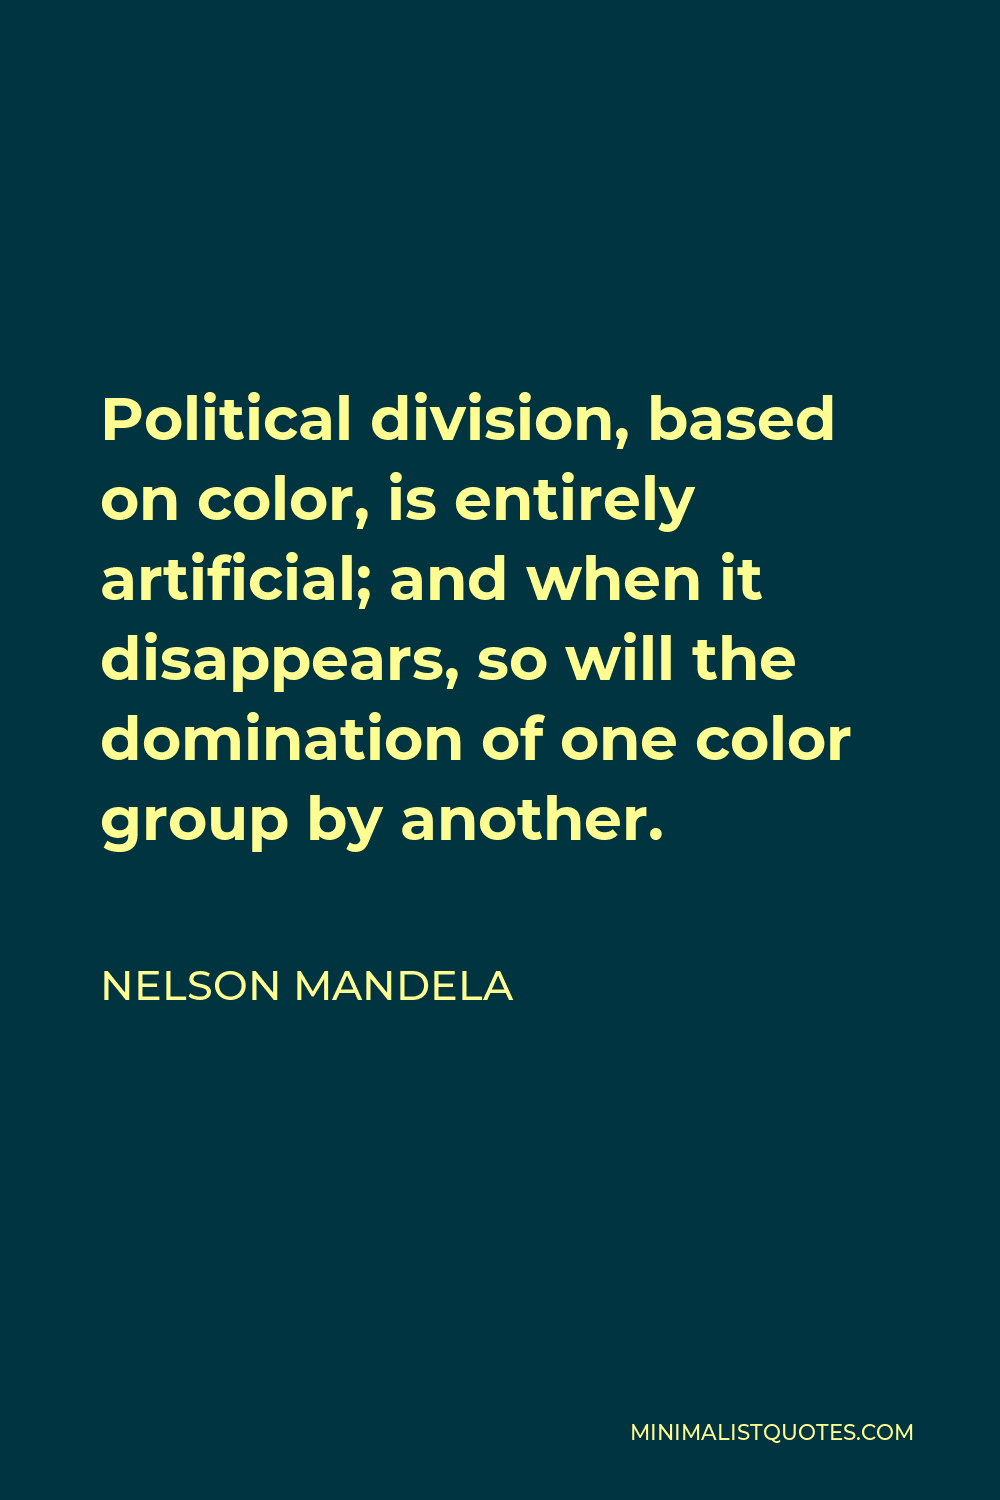 Nelson Mandela Quote - Political division, based on color, is entirely artificial; and when it disappears, so will the domination of one color group by another.